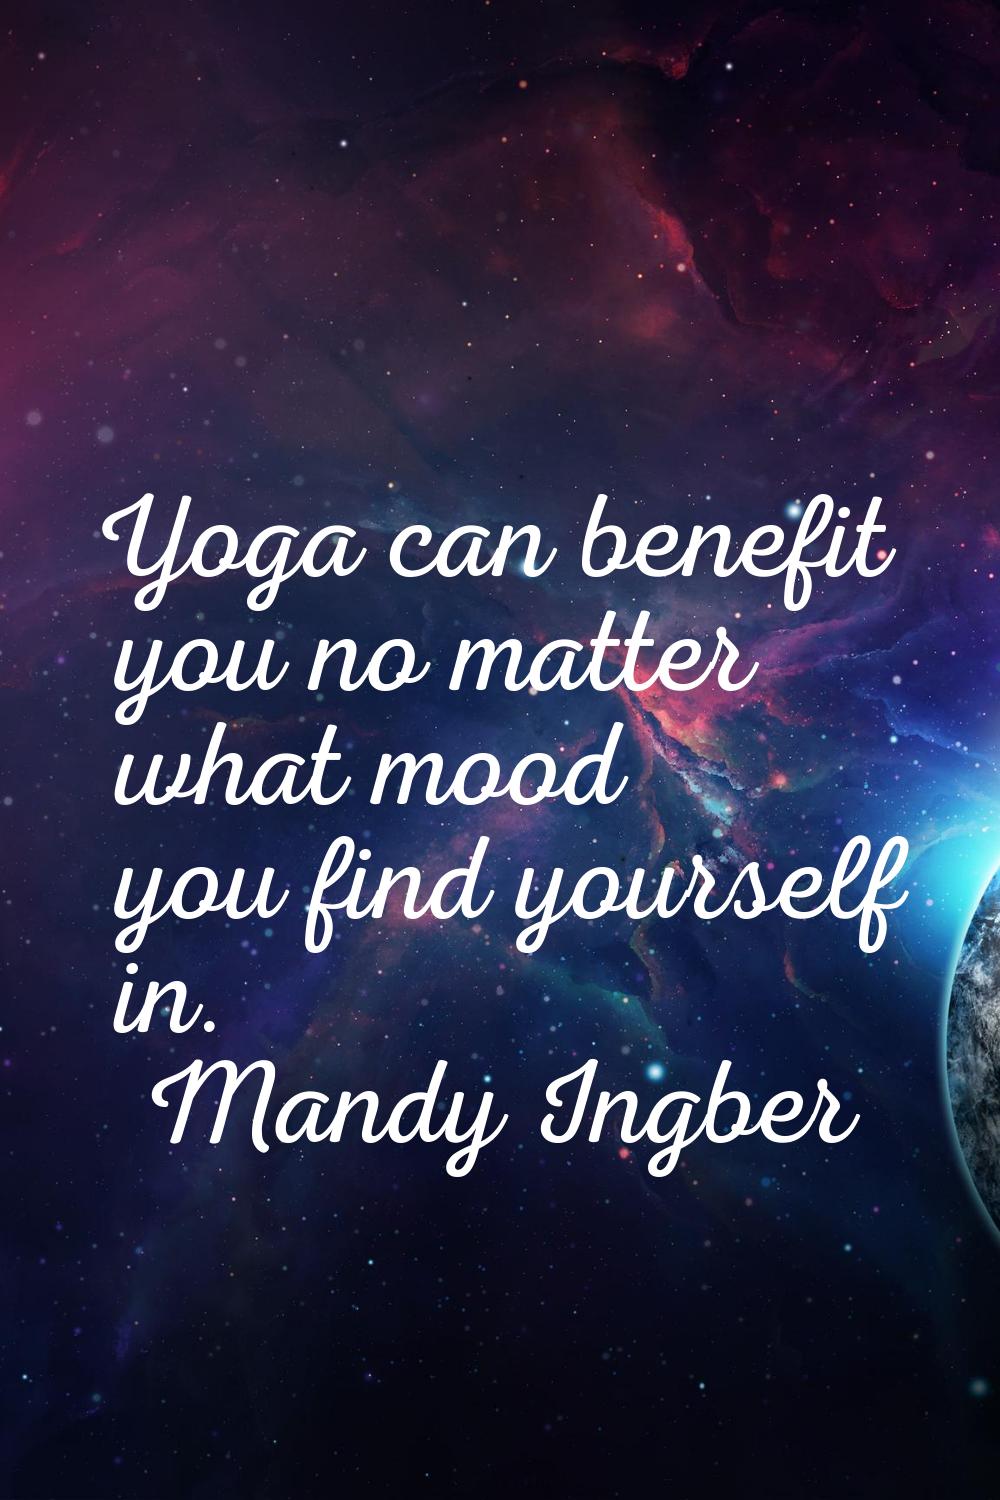 Yoga can benefit you no matter what mood you find yourself in.